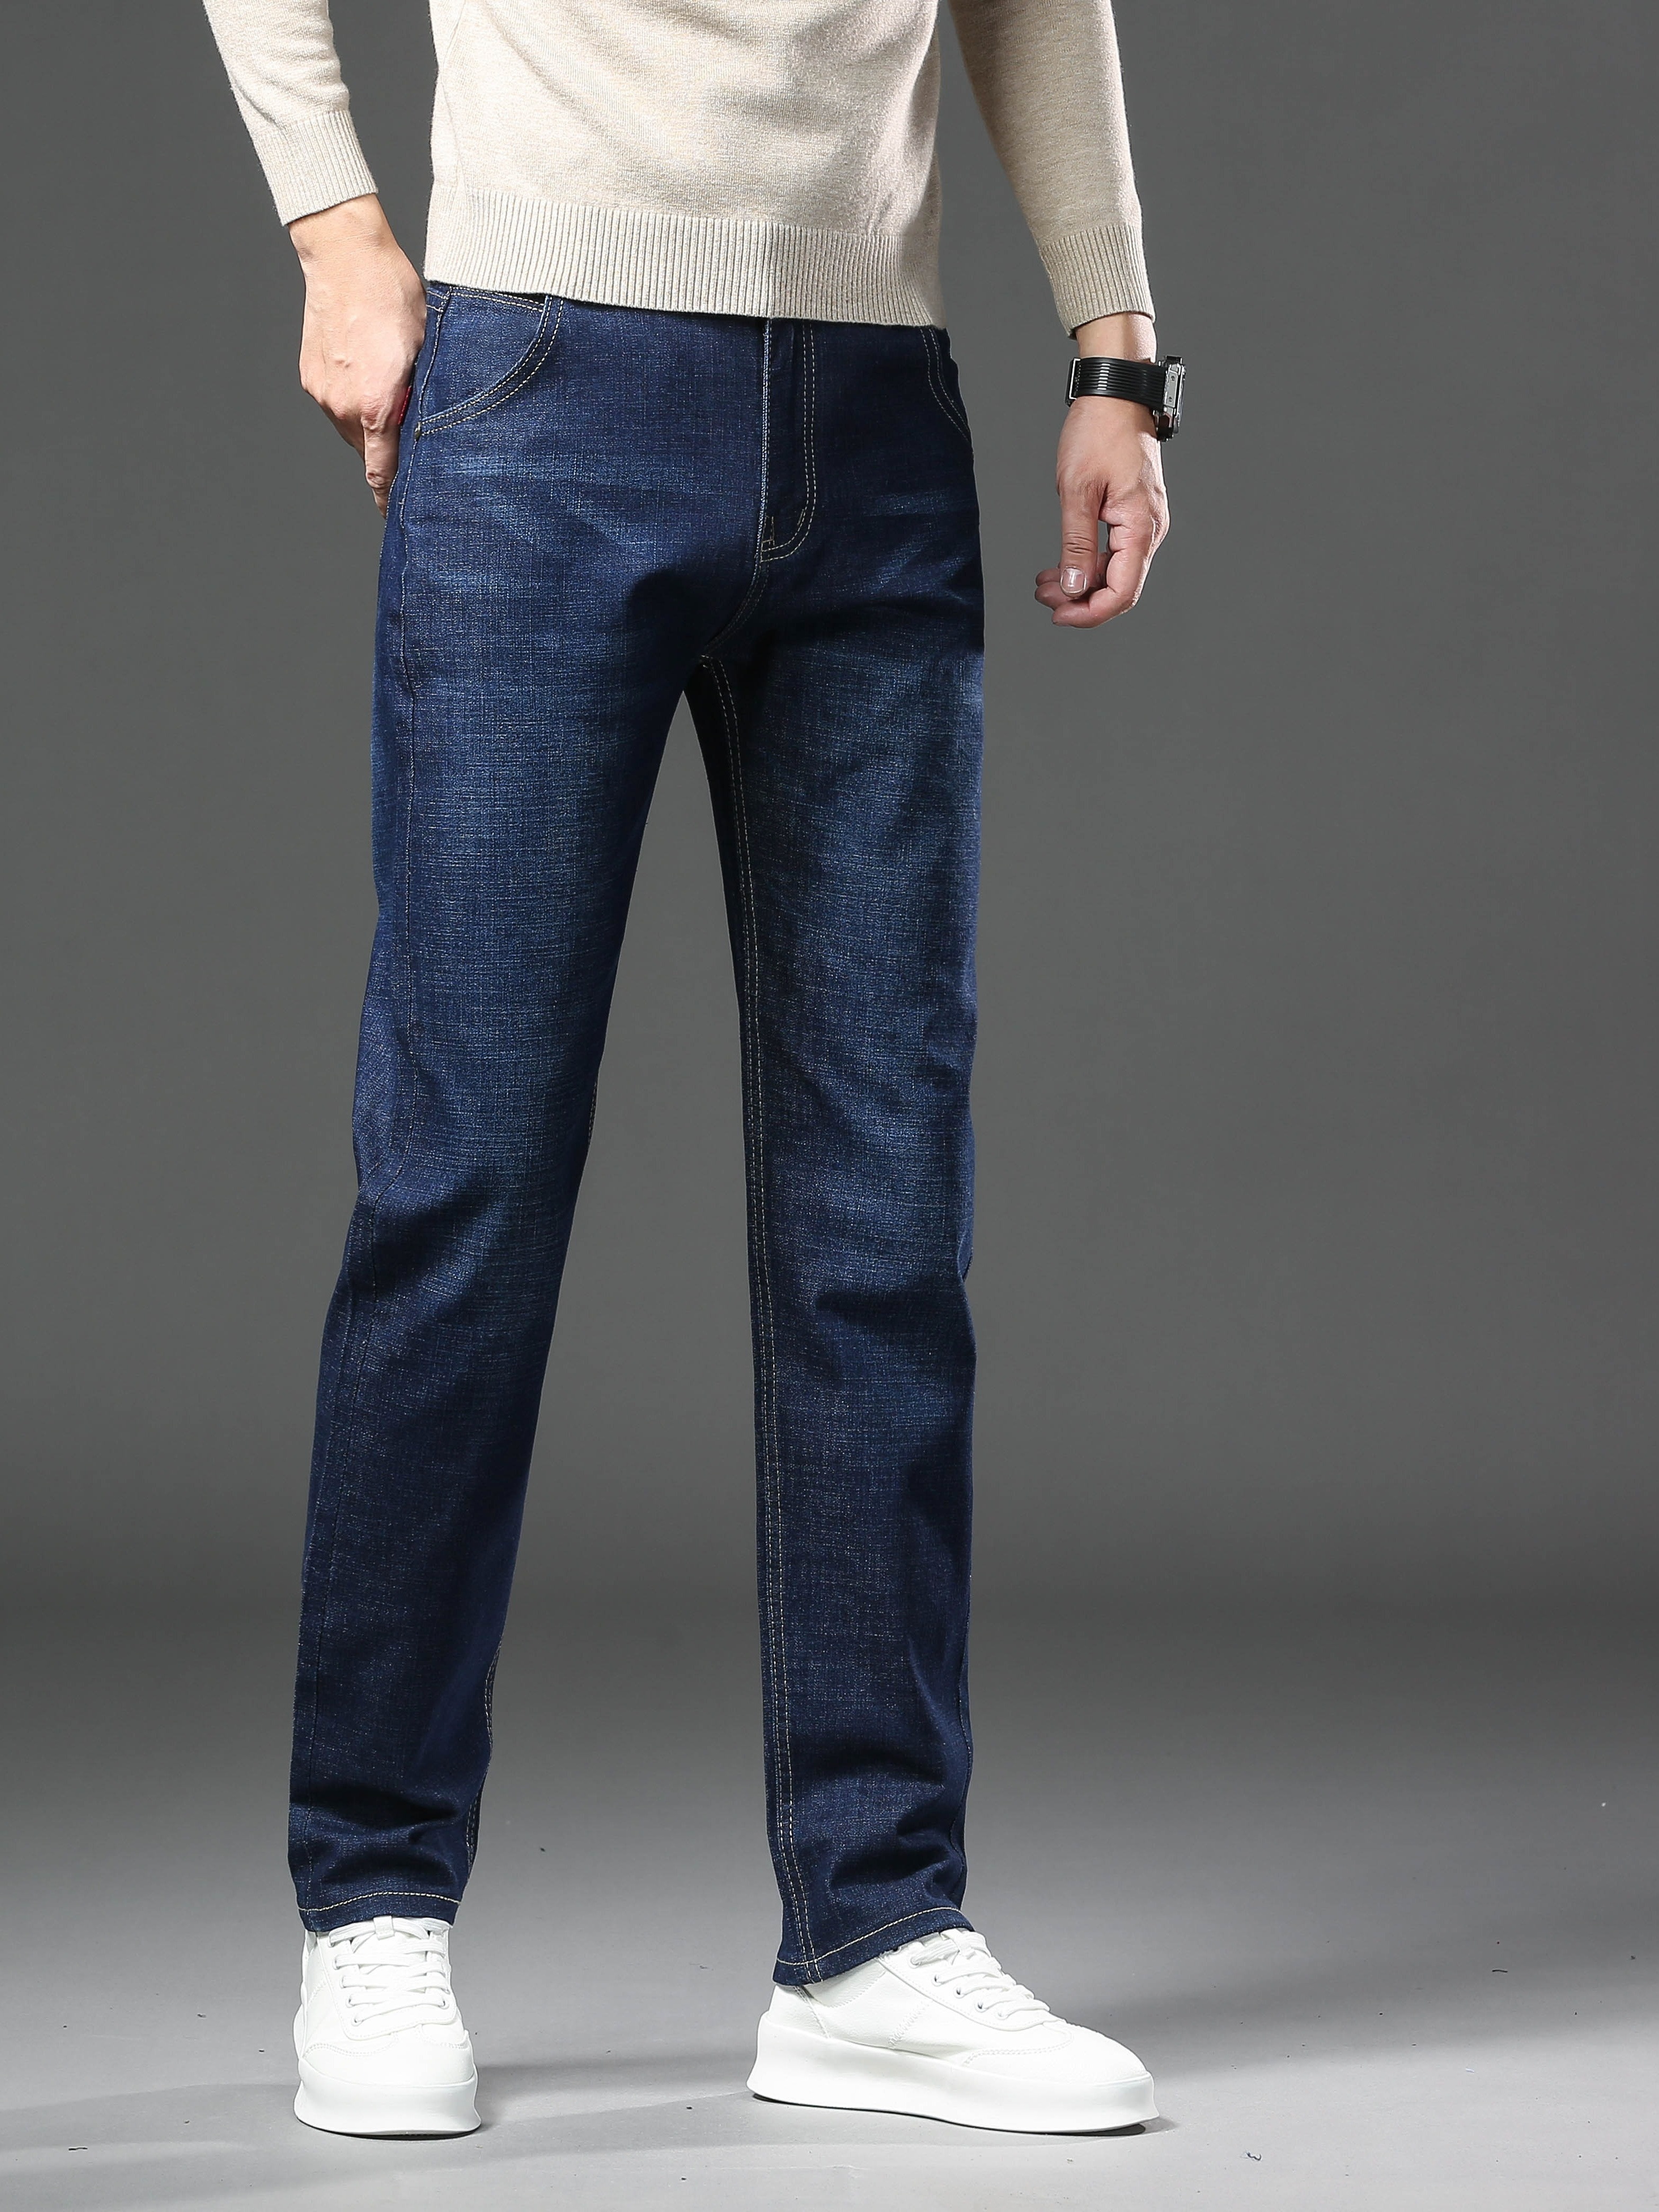 mens semi formal jeans classic design stretch jeans for business